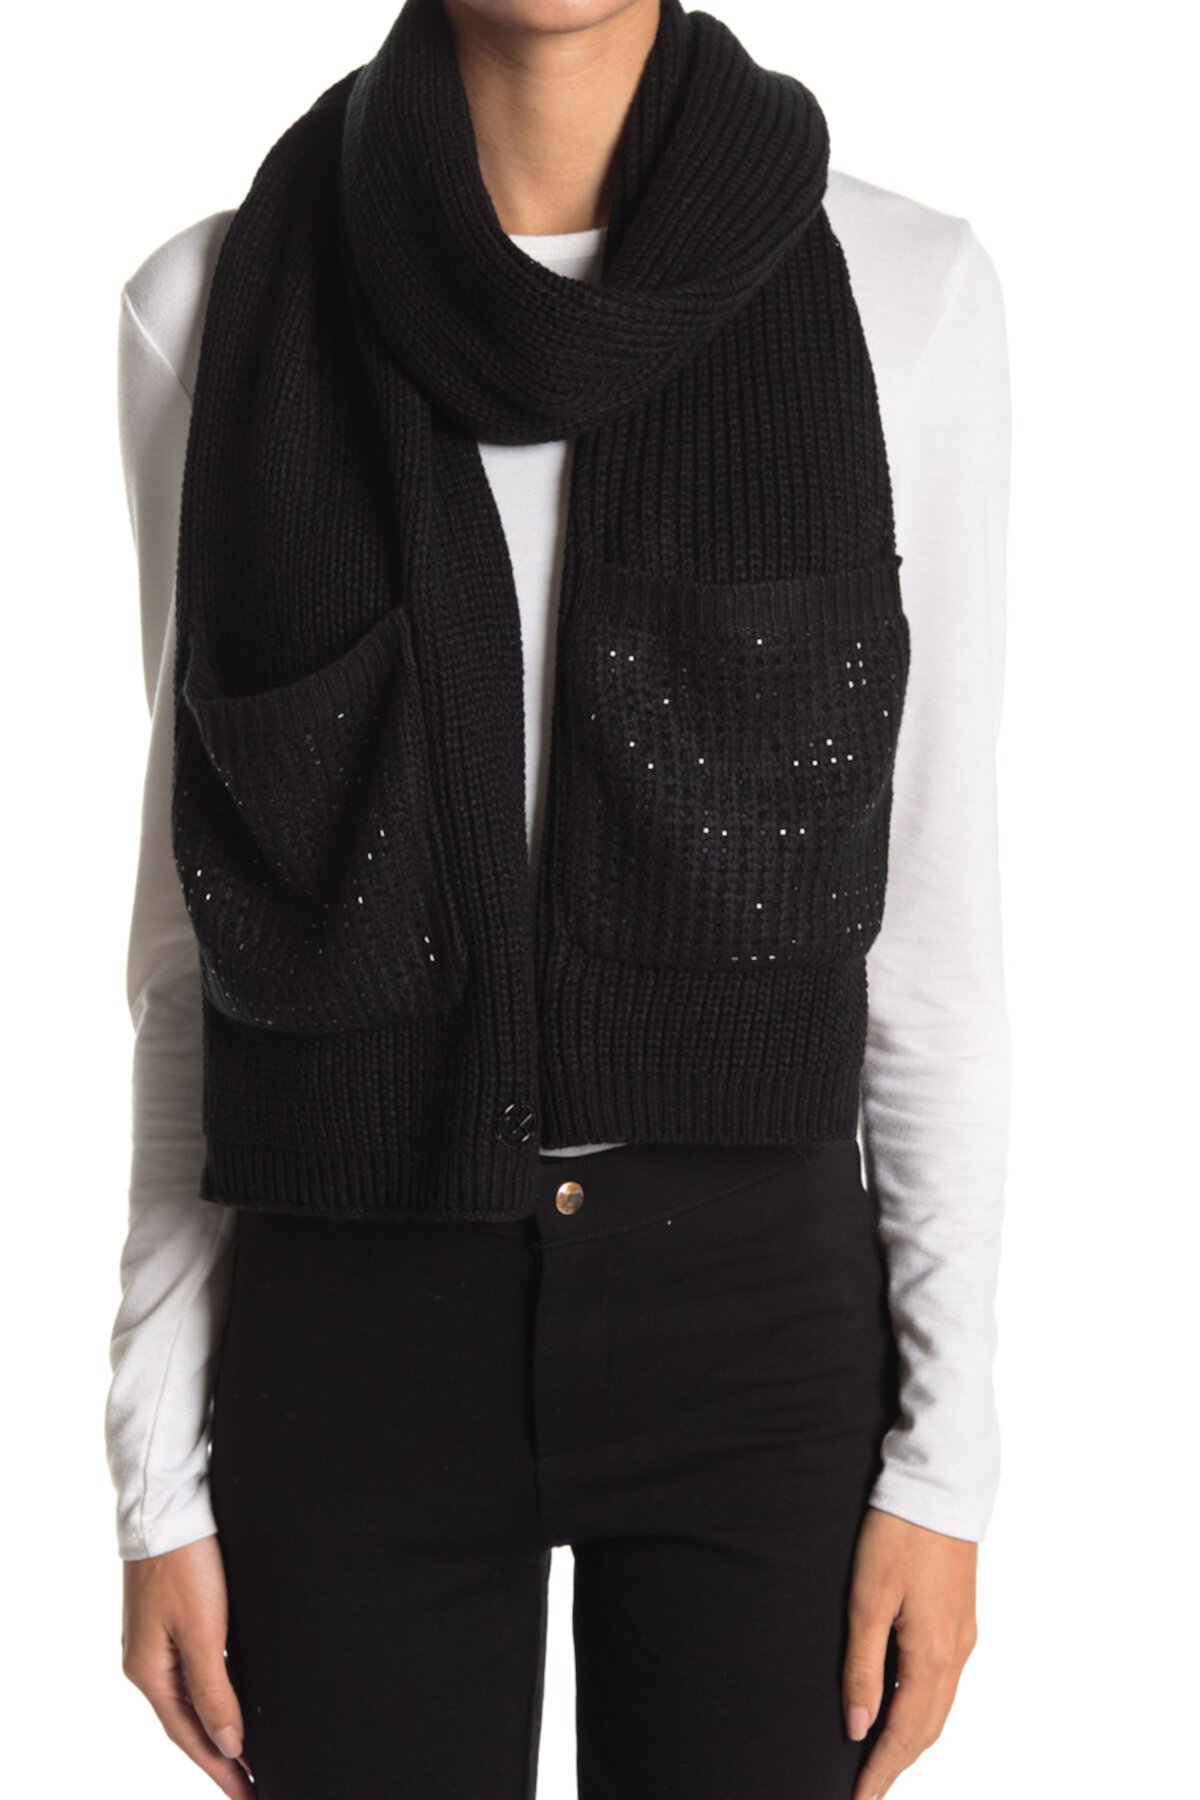 Square Studded Scarf Calvin Klein